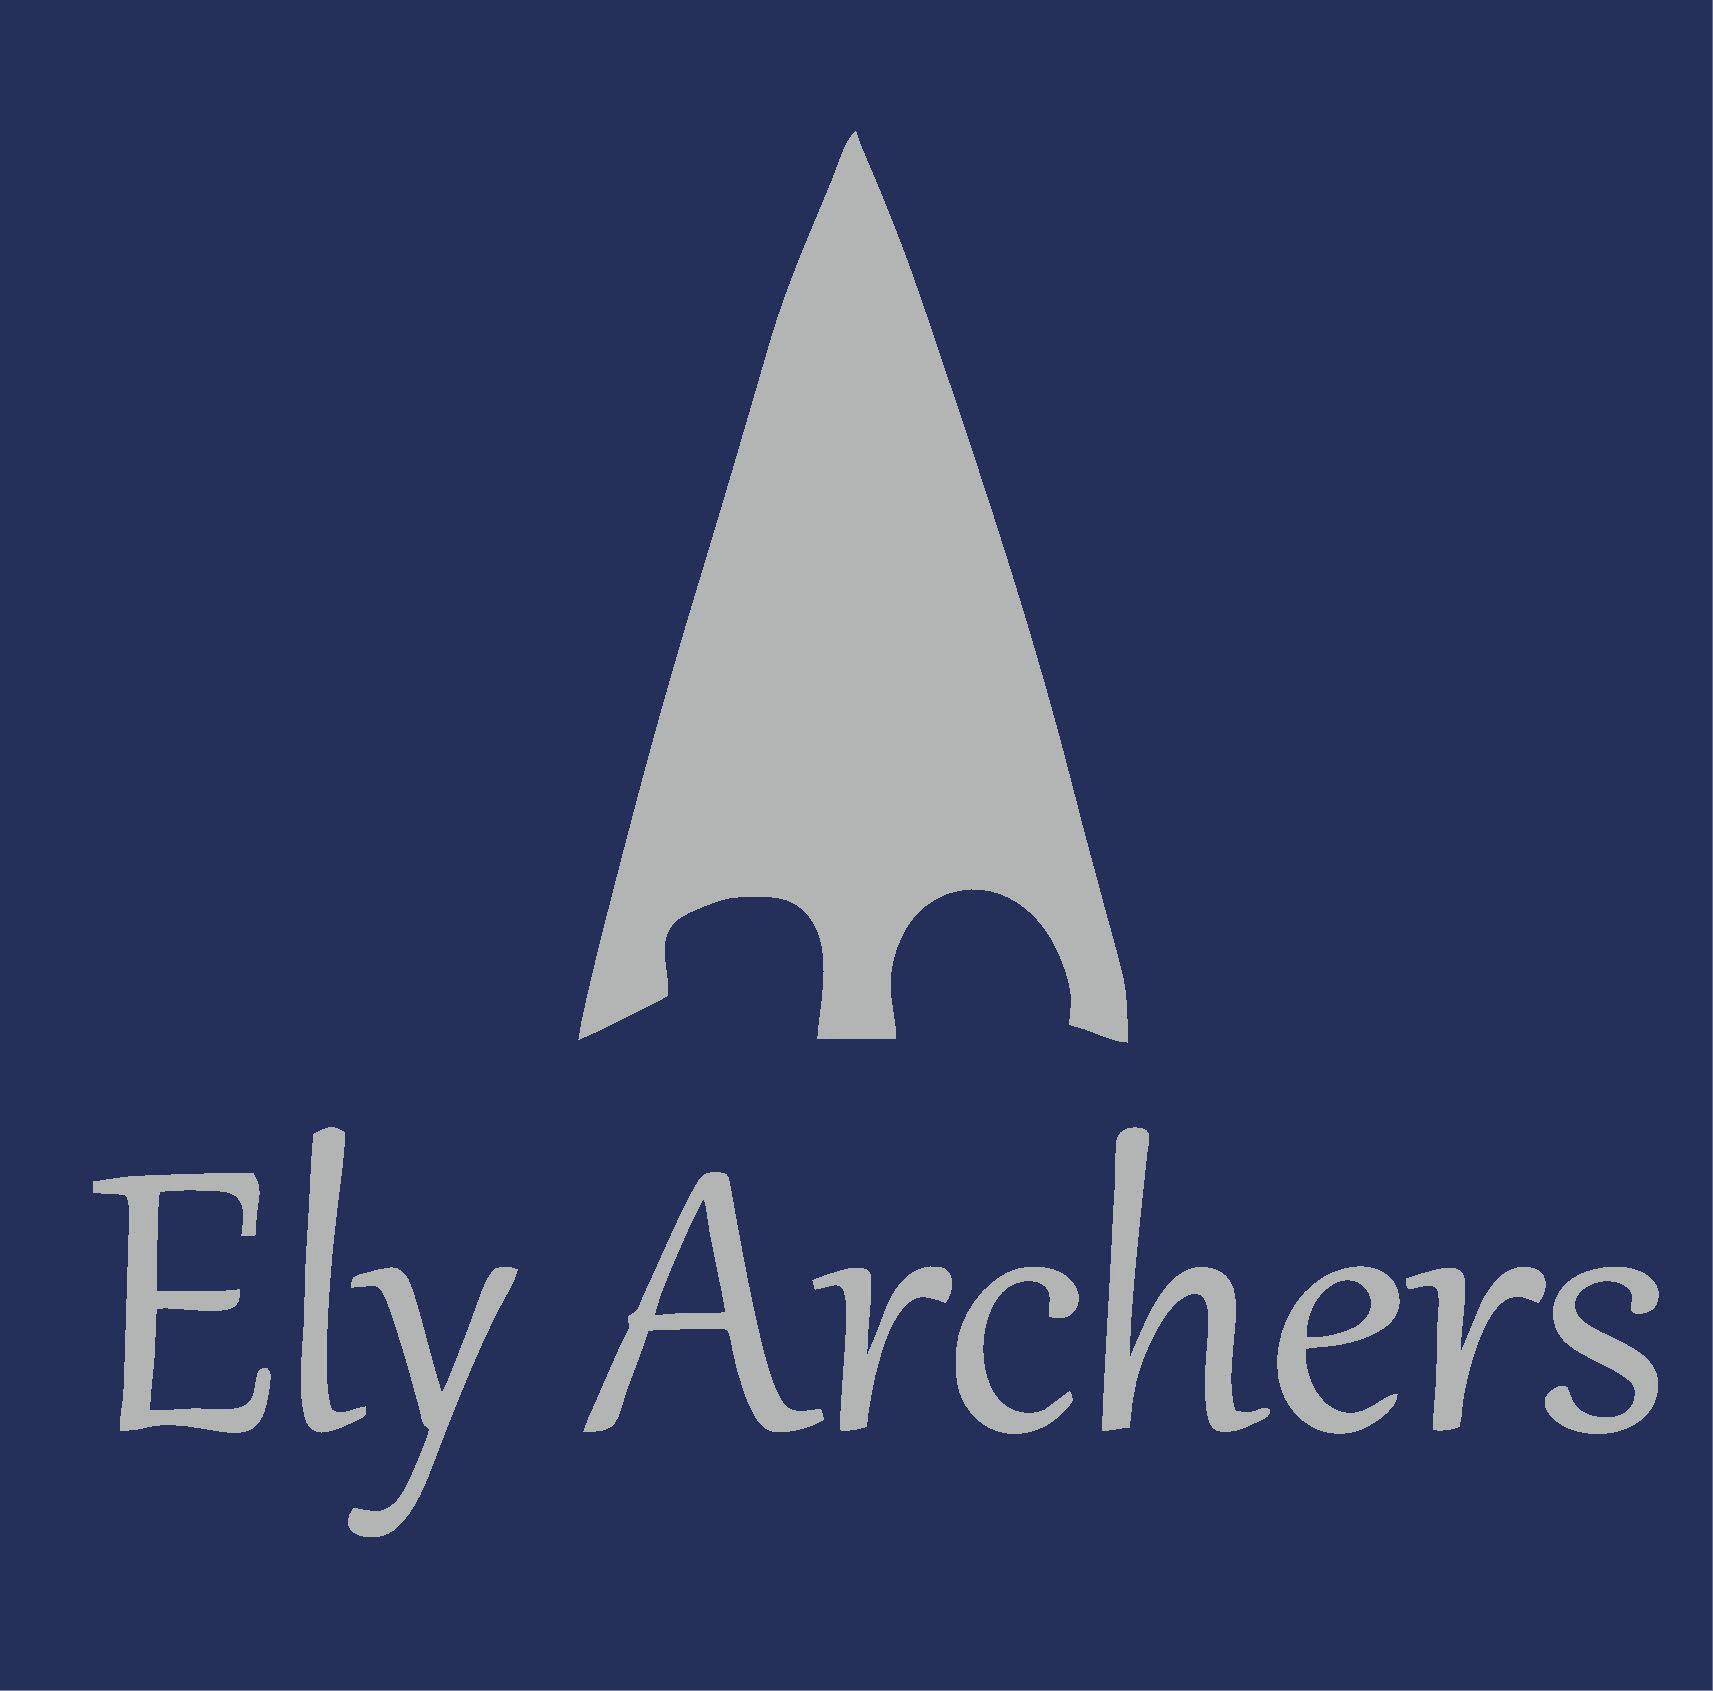 Ely Archers logo sigma embroidery